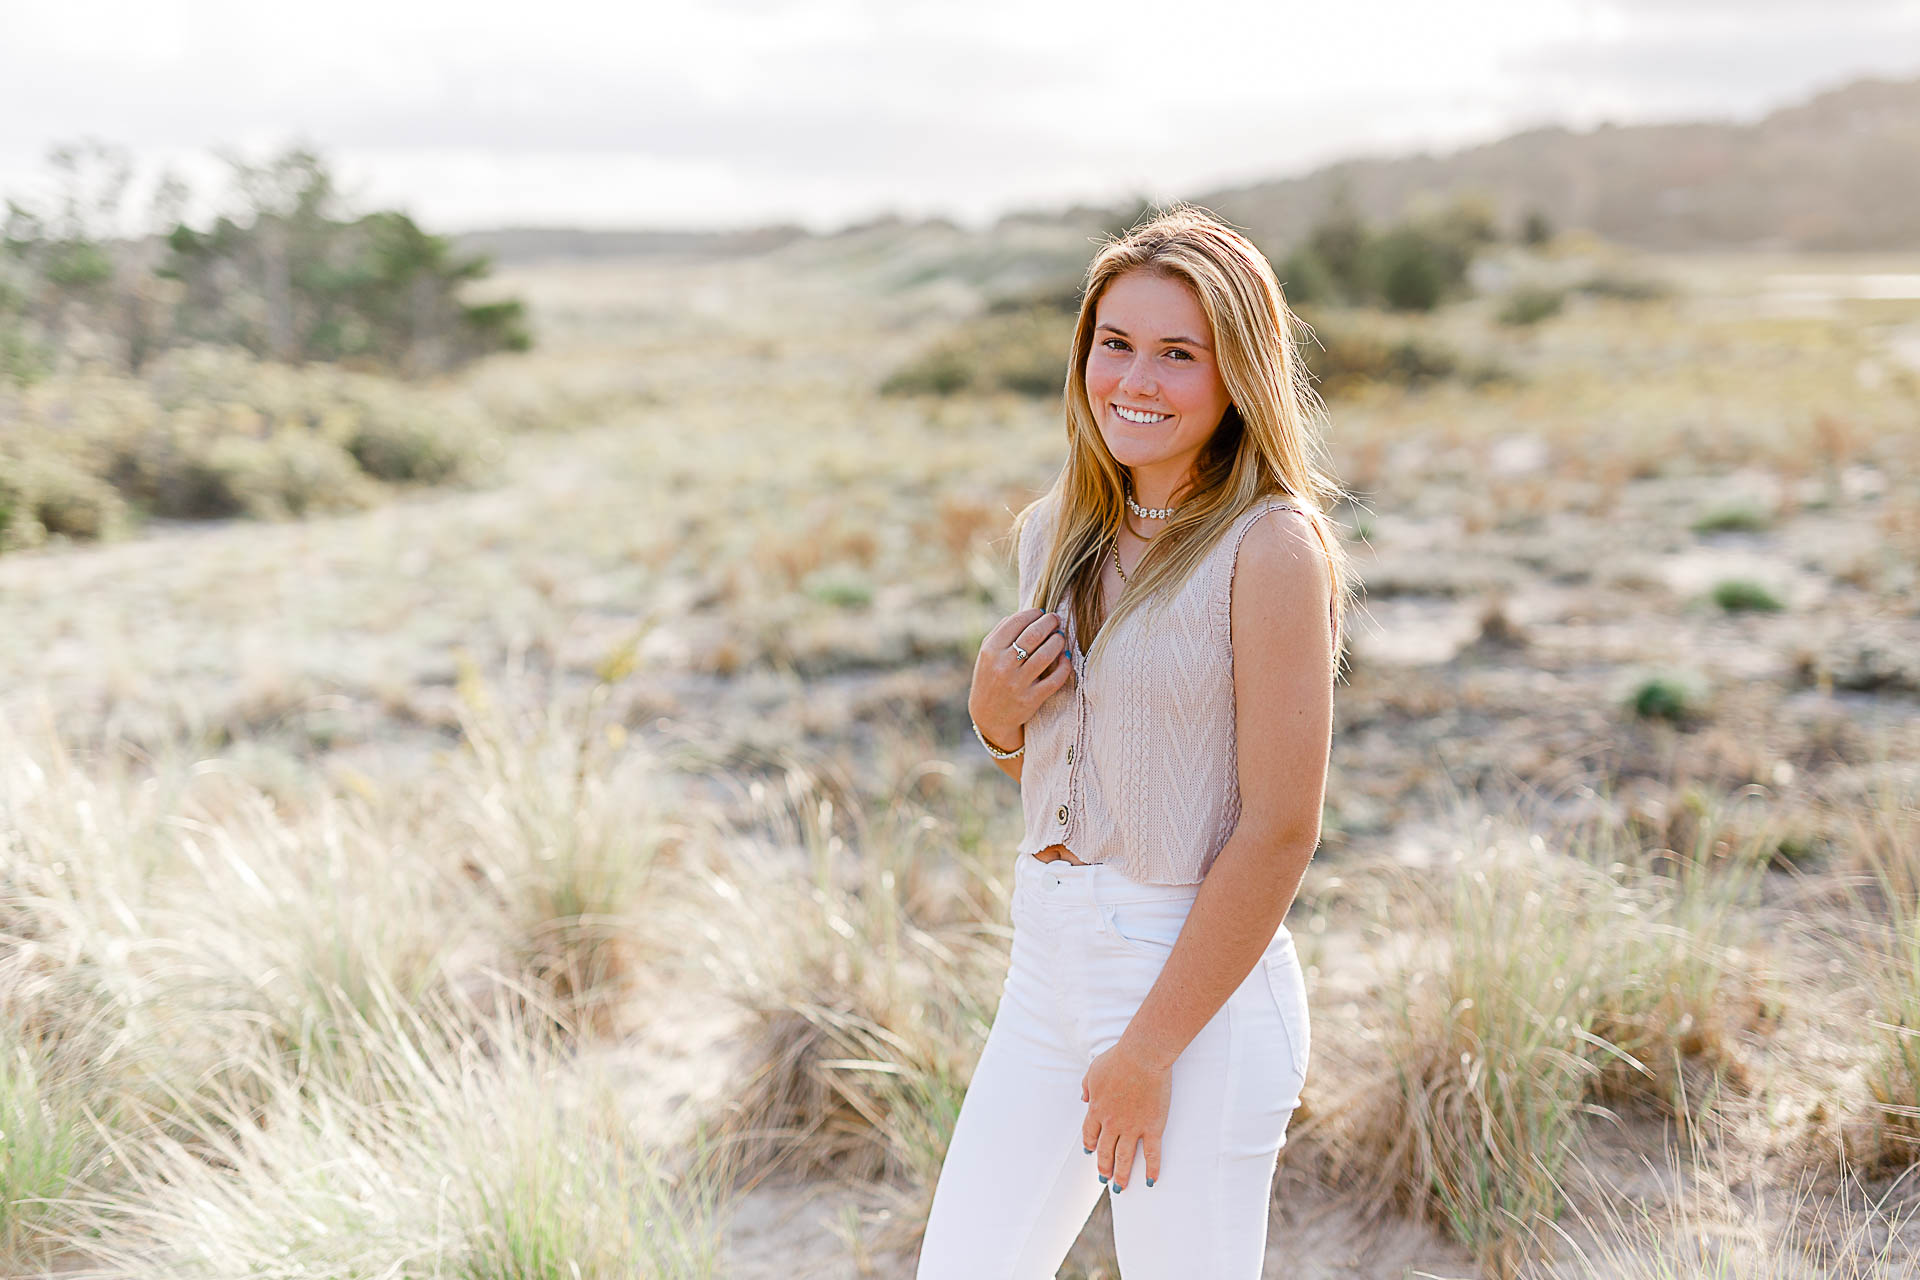 Photo of Caroline's Thayer Academy Senior Pictures by Christina Runnals Photography | Girl smiling in beach grass 